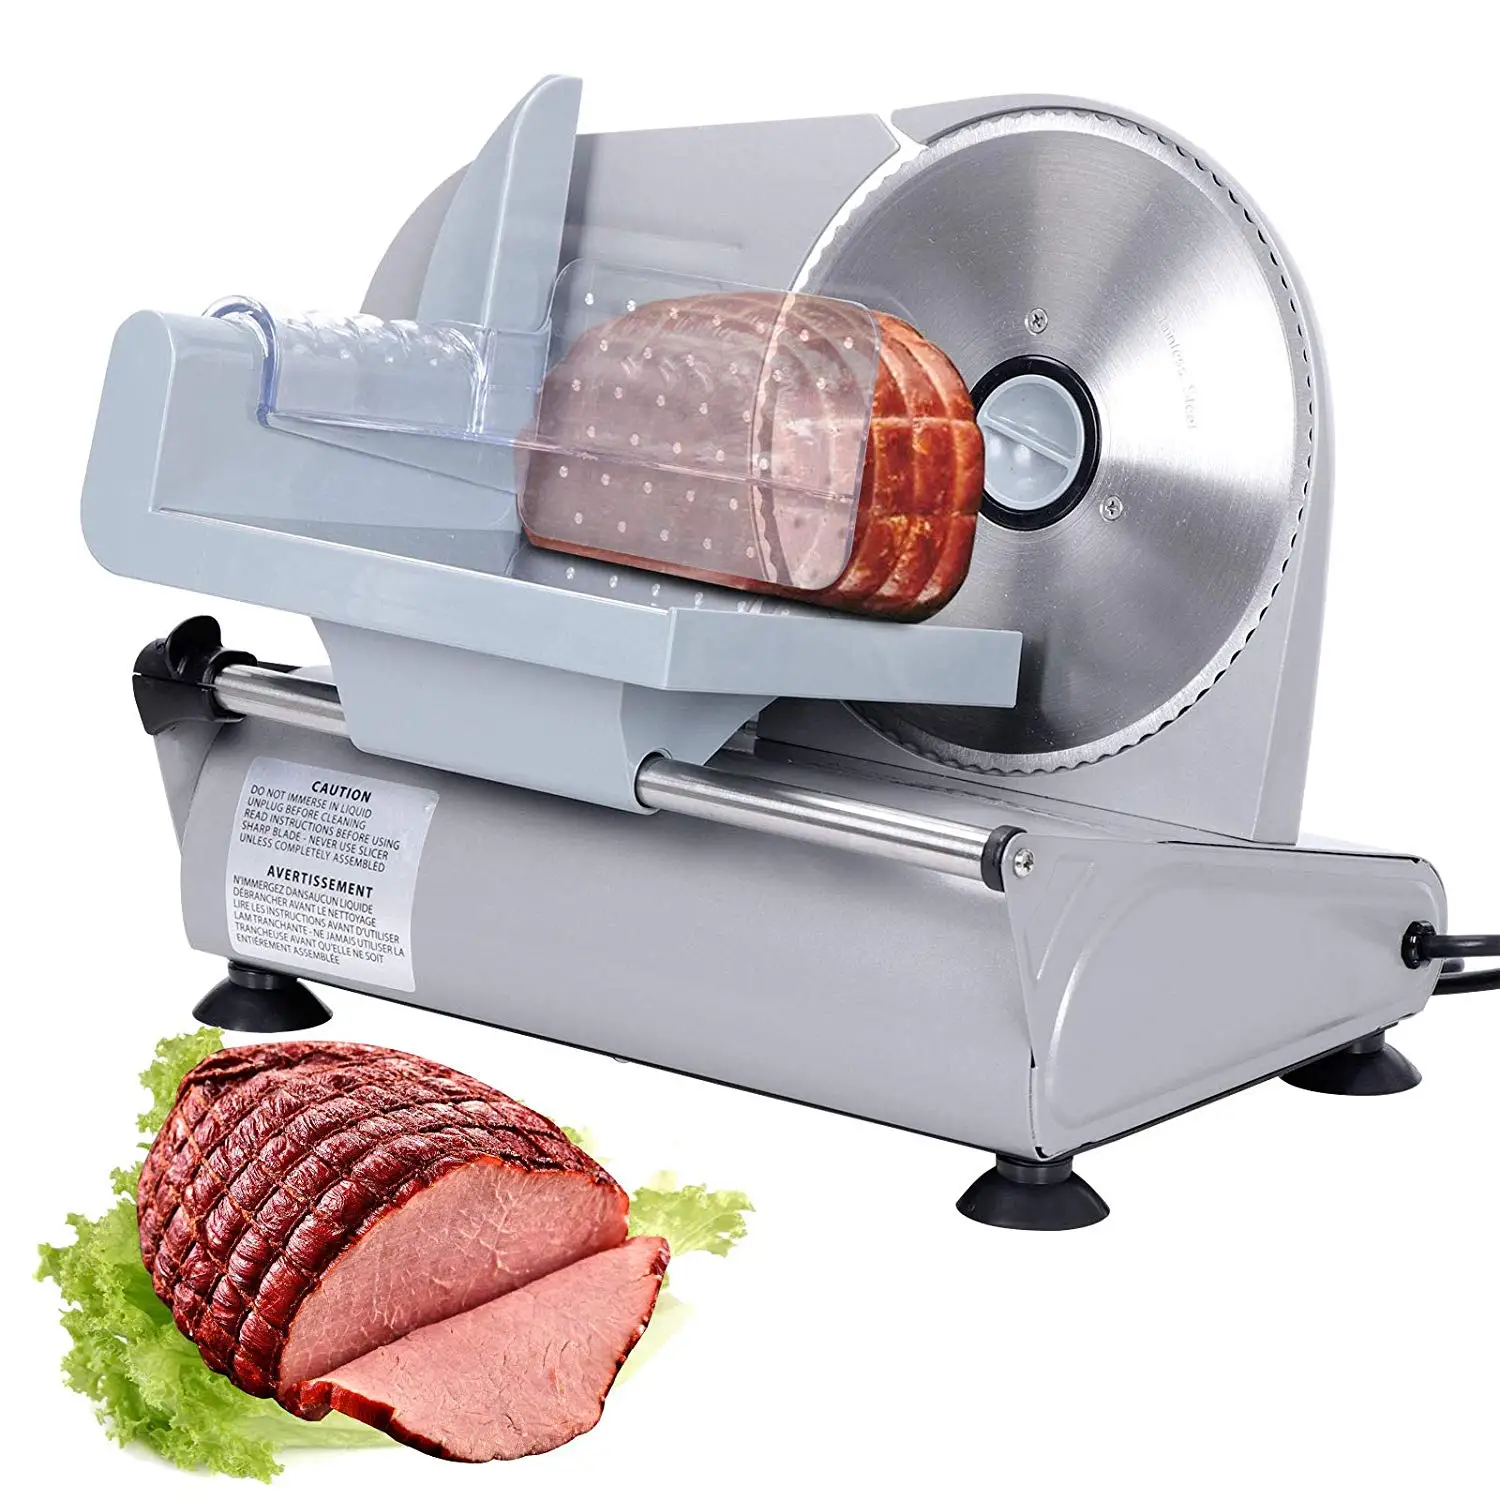 electric bread and meat slicer